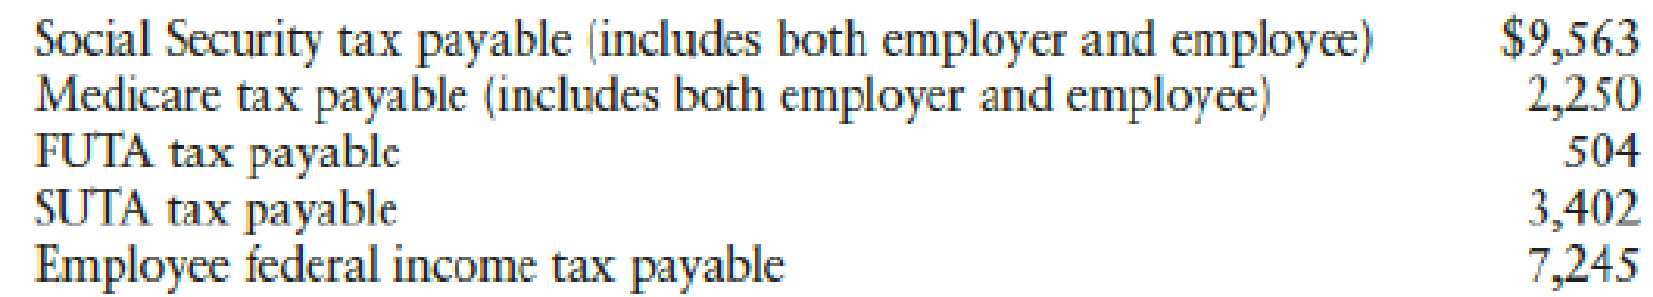 Chapter 9, Problem 5SEB, JOURNAL ENTRIES FOR PAYMENT OF EMPLOYER PAYROLL TAXES Francis Baker owns a business called Baker 